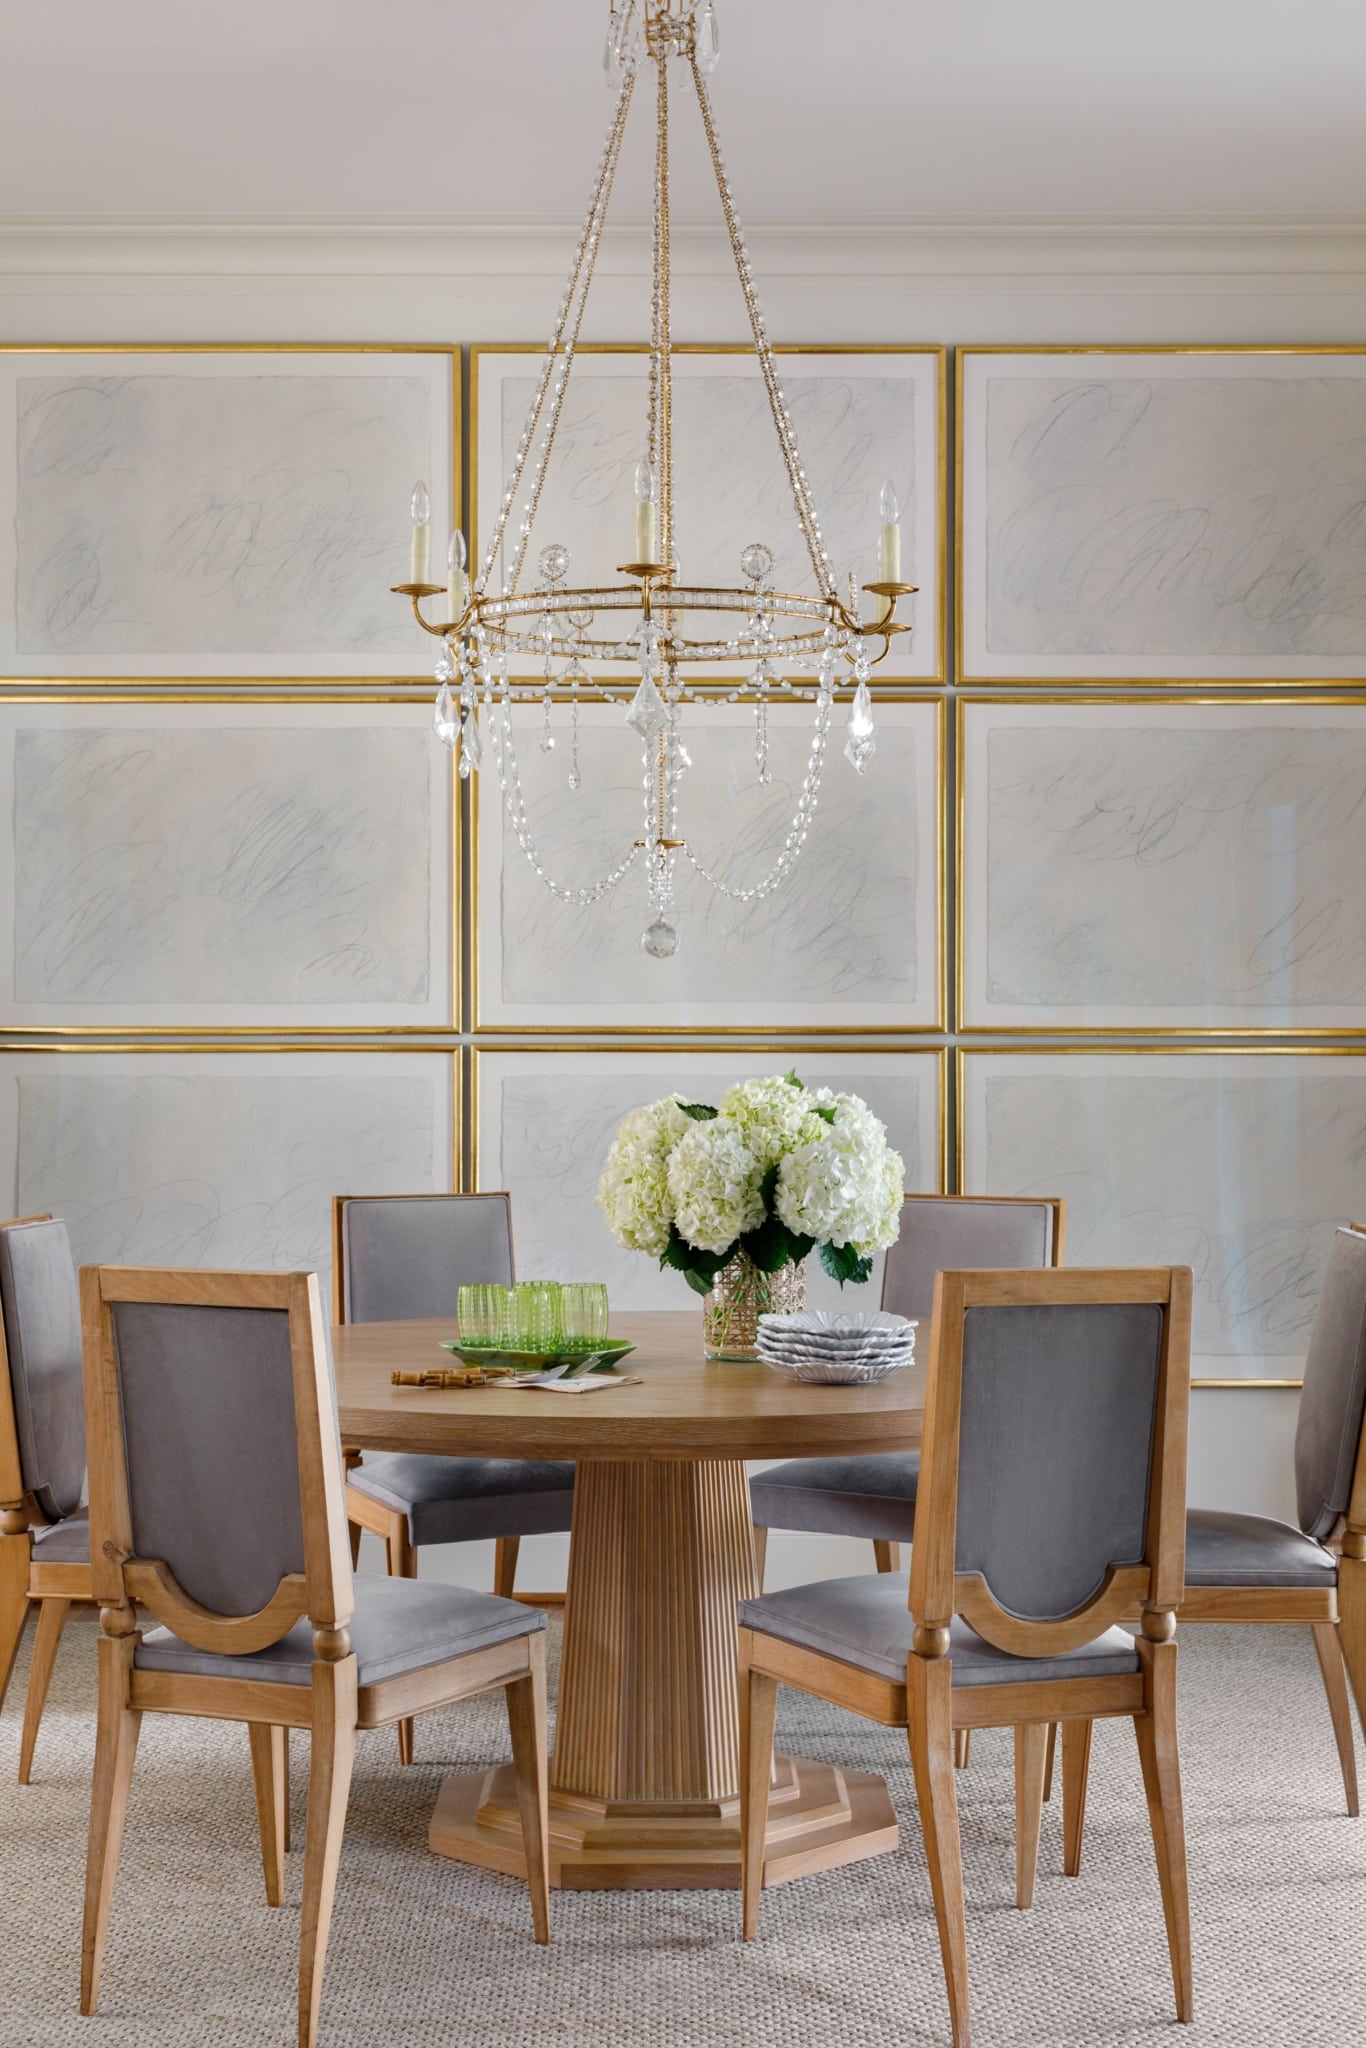 Paloma Contreras, celebrated interior designer and tastemaker, has once again captivated design enthusiasts with her latest book, The New Classic Home: Where Timeless Style Meets Modern Design. Aimée Mazzenga Photography = gallery wall - round dining table - crystal chandelier